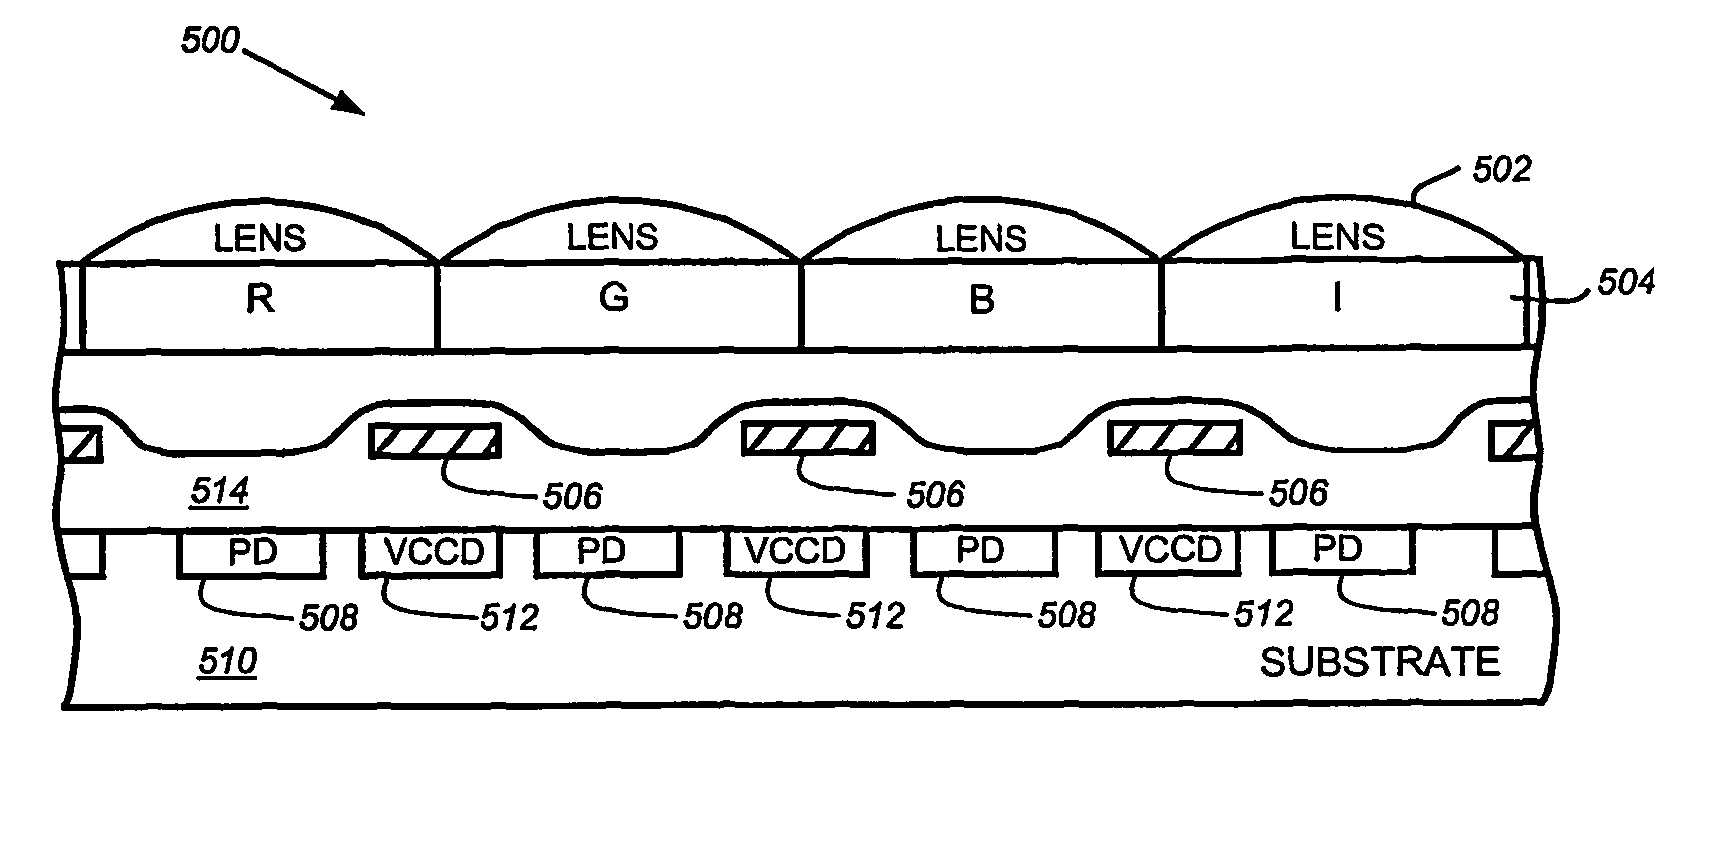 Device for wavelength-selective imaging